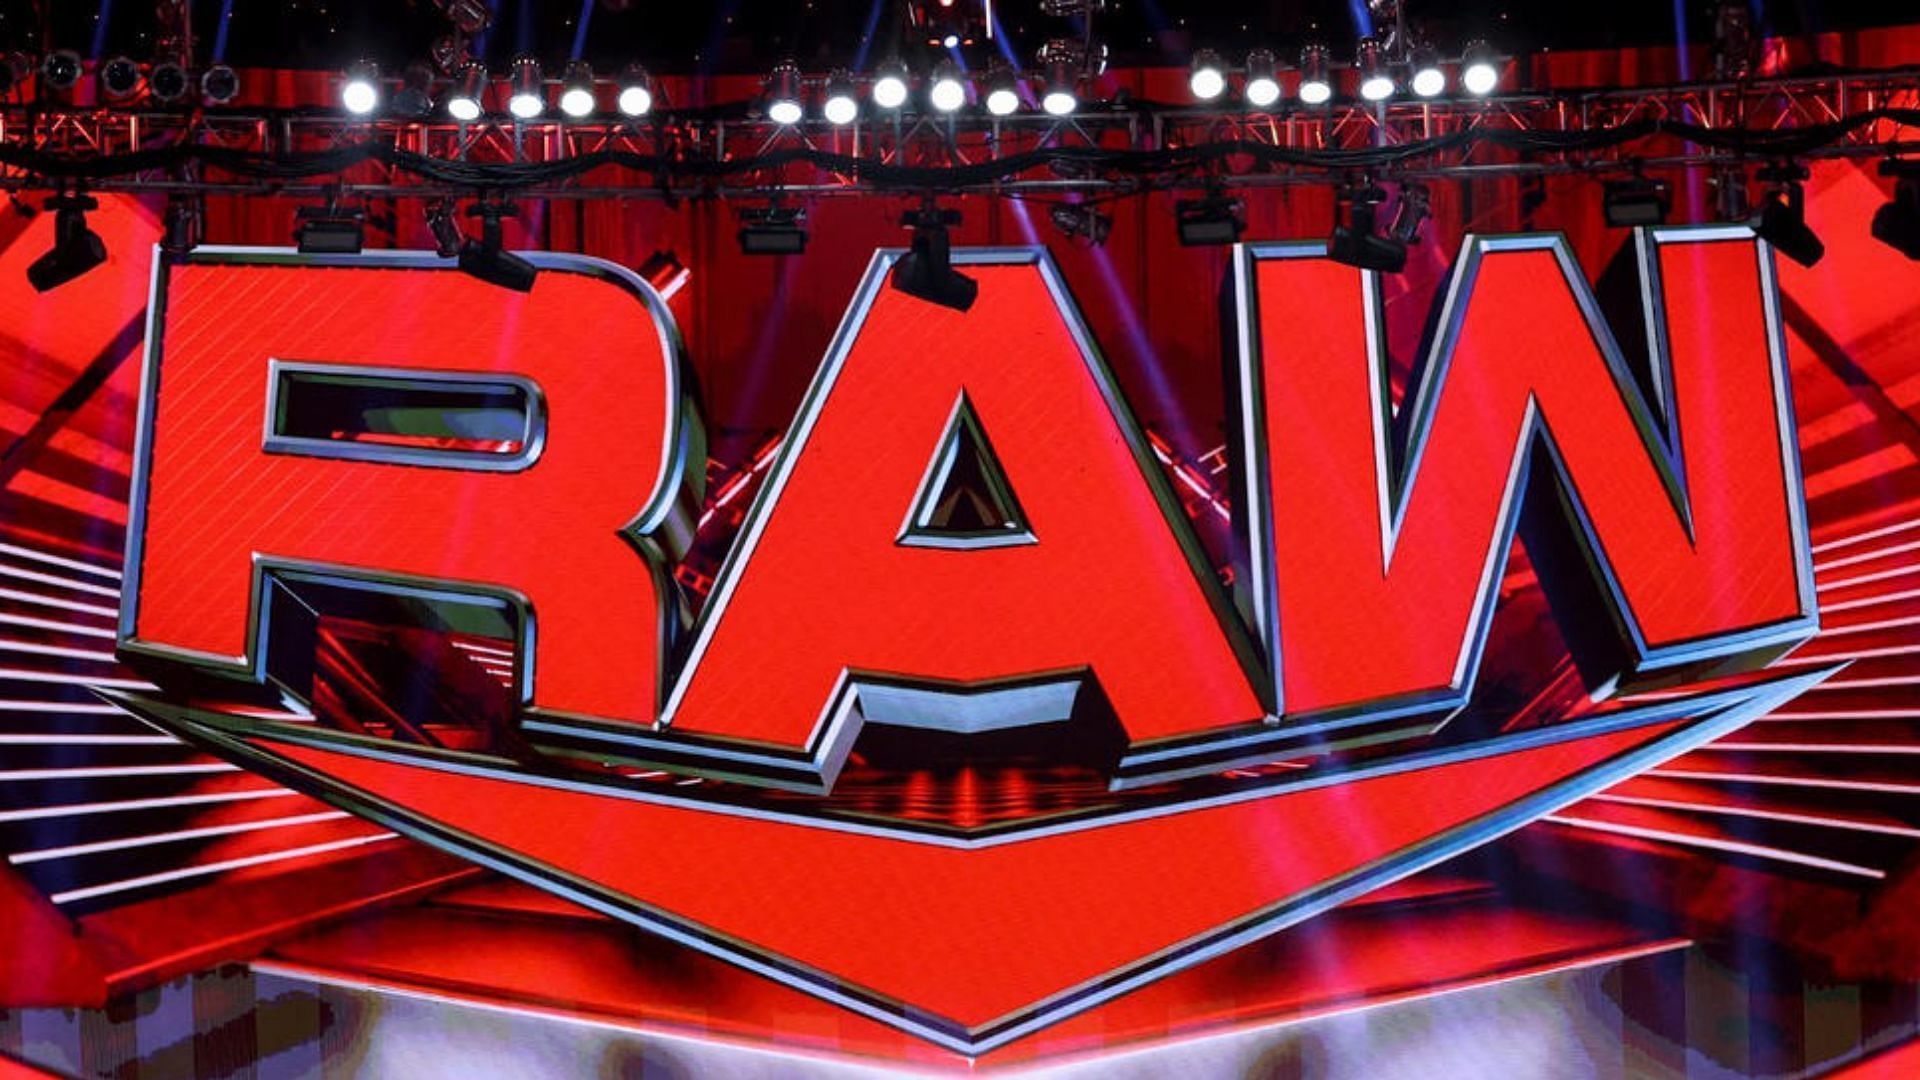 WWE RAW is one of World Wrestling Entertainment